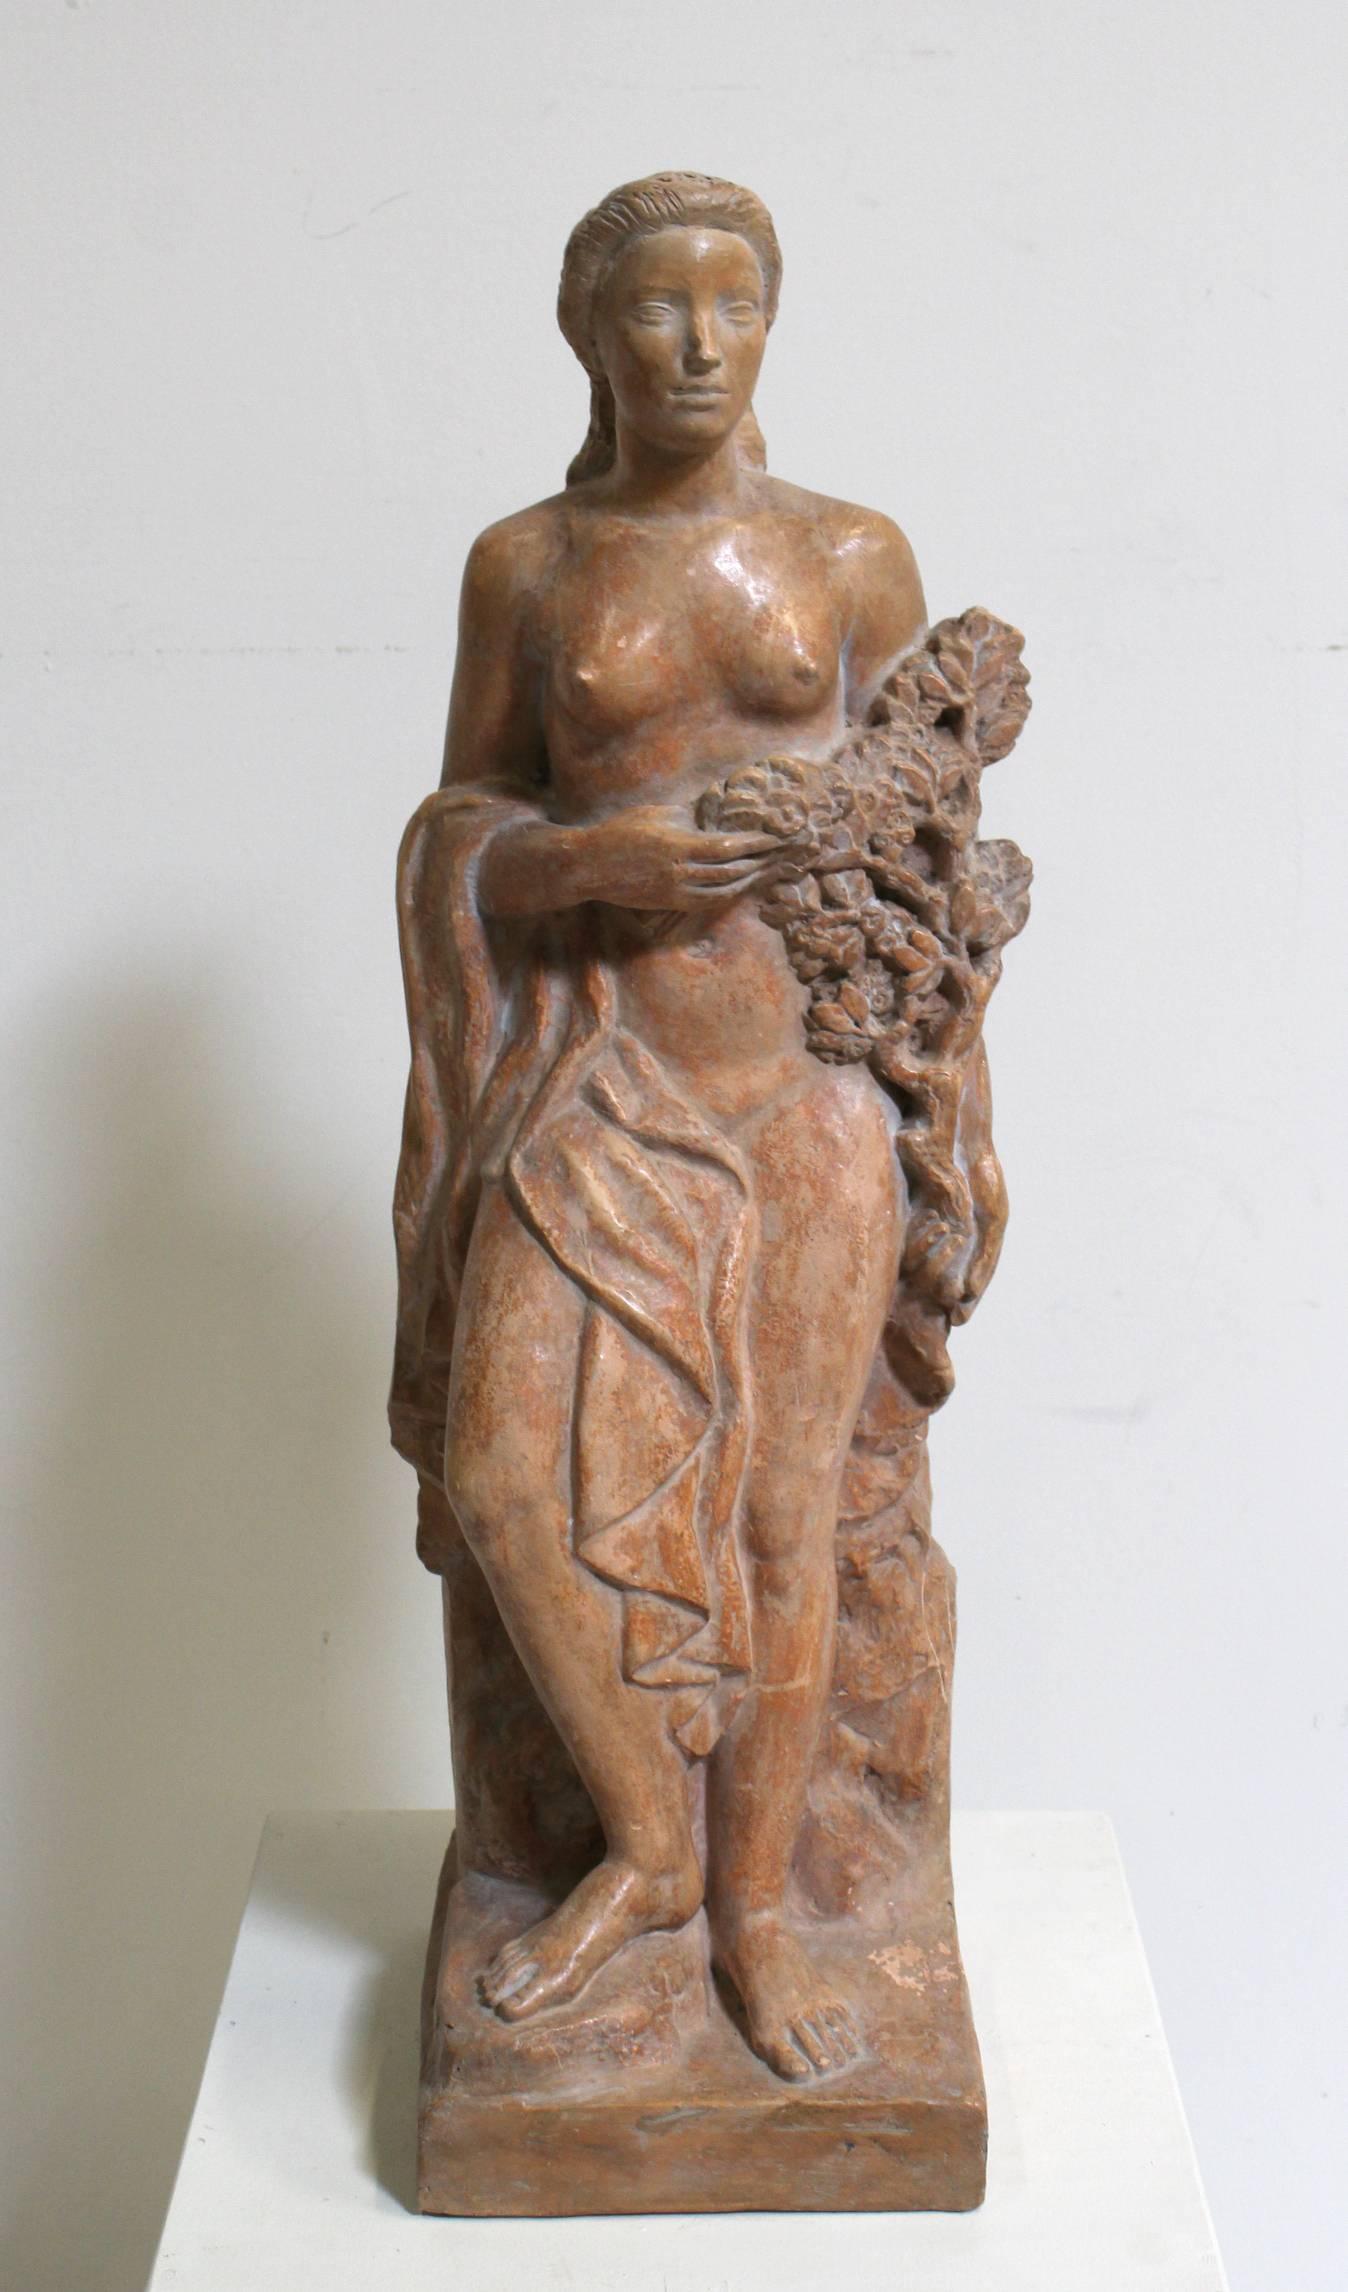 Two Art Deco plaster sculptures of young women and agricultural symbols by Denis Gelin (1896-1979). Gelin is known for his long partnership with famous French architect, Jacques Carlu during the 1920s and 1930s. Gelin produced sculptures and statues